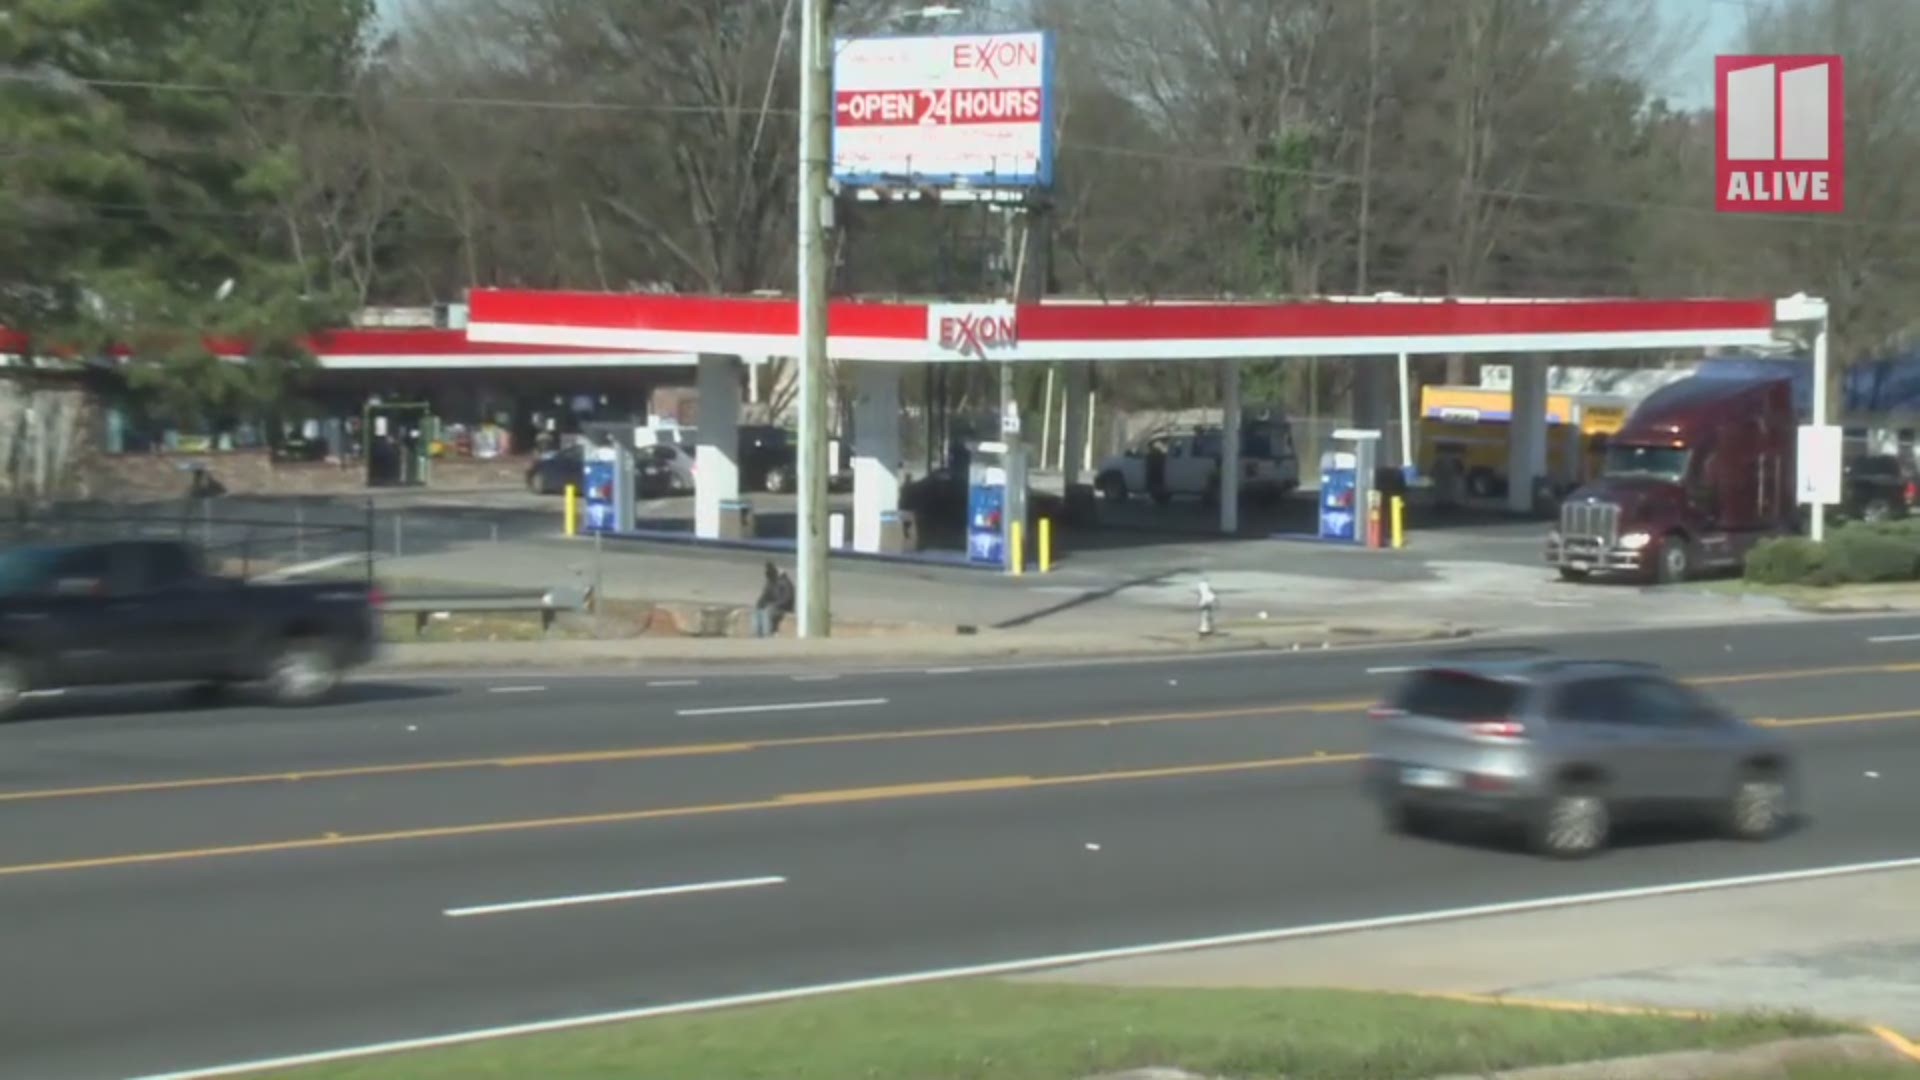 Atlanta Police said a female victim was shot in the leg by her boyfriend during a dispute at a gas station Saturday morning. He fled before police arrived.